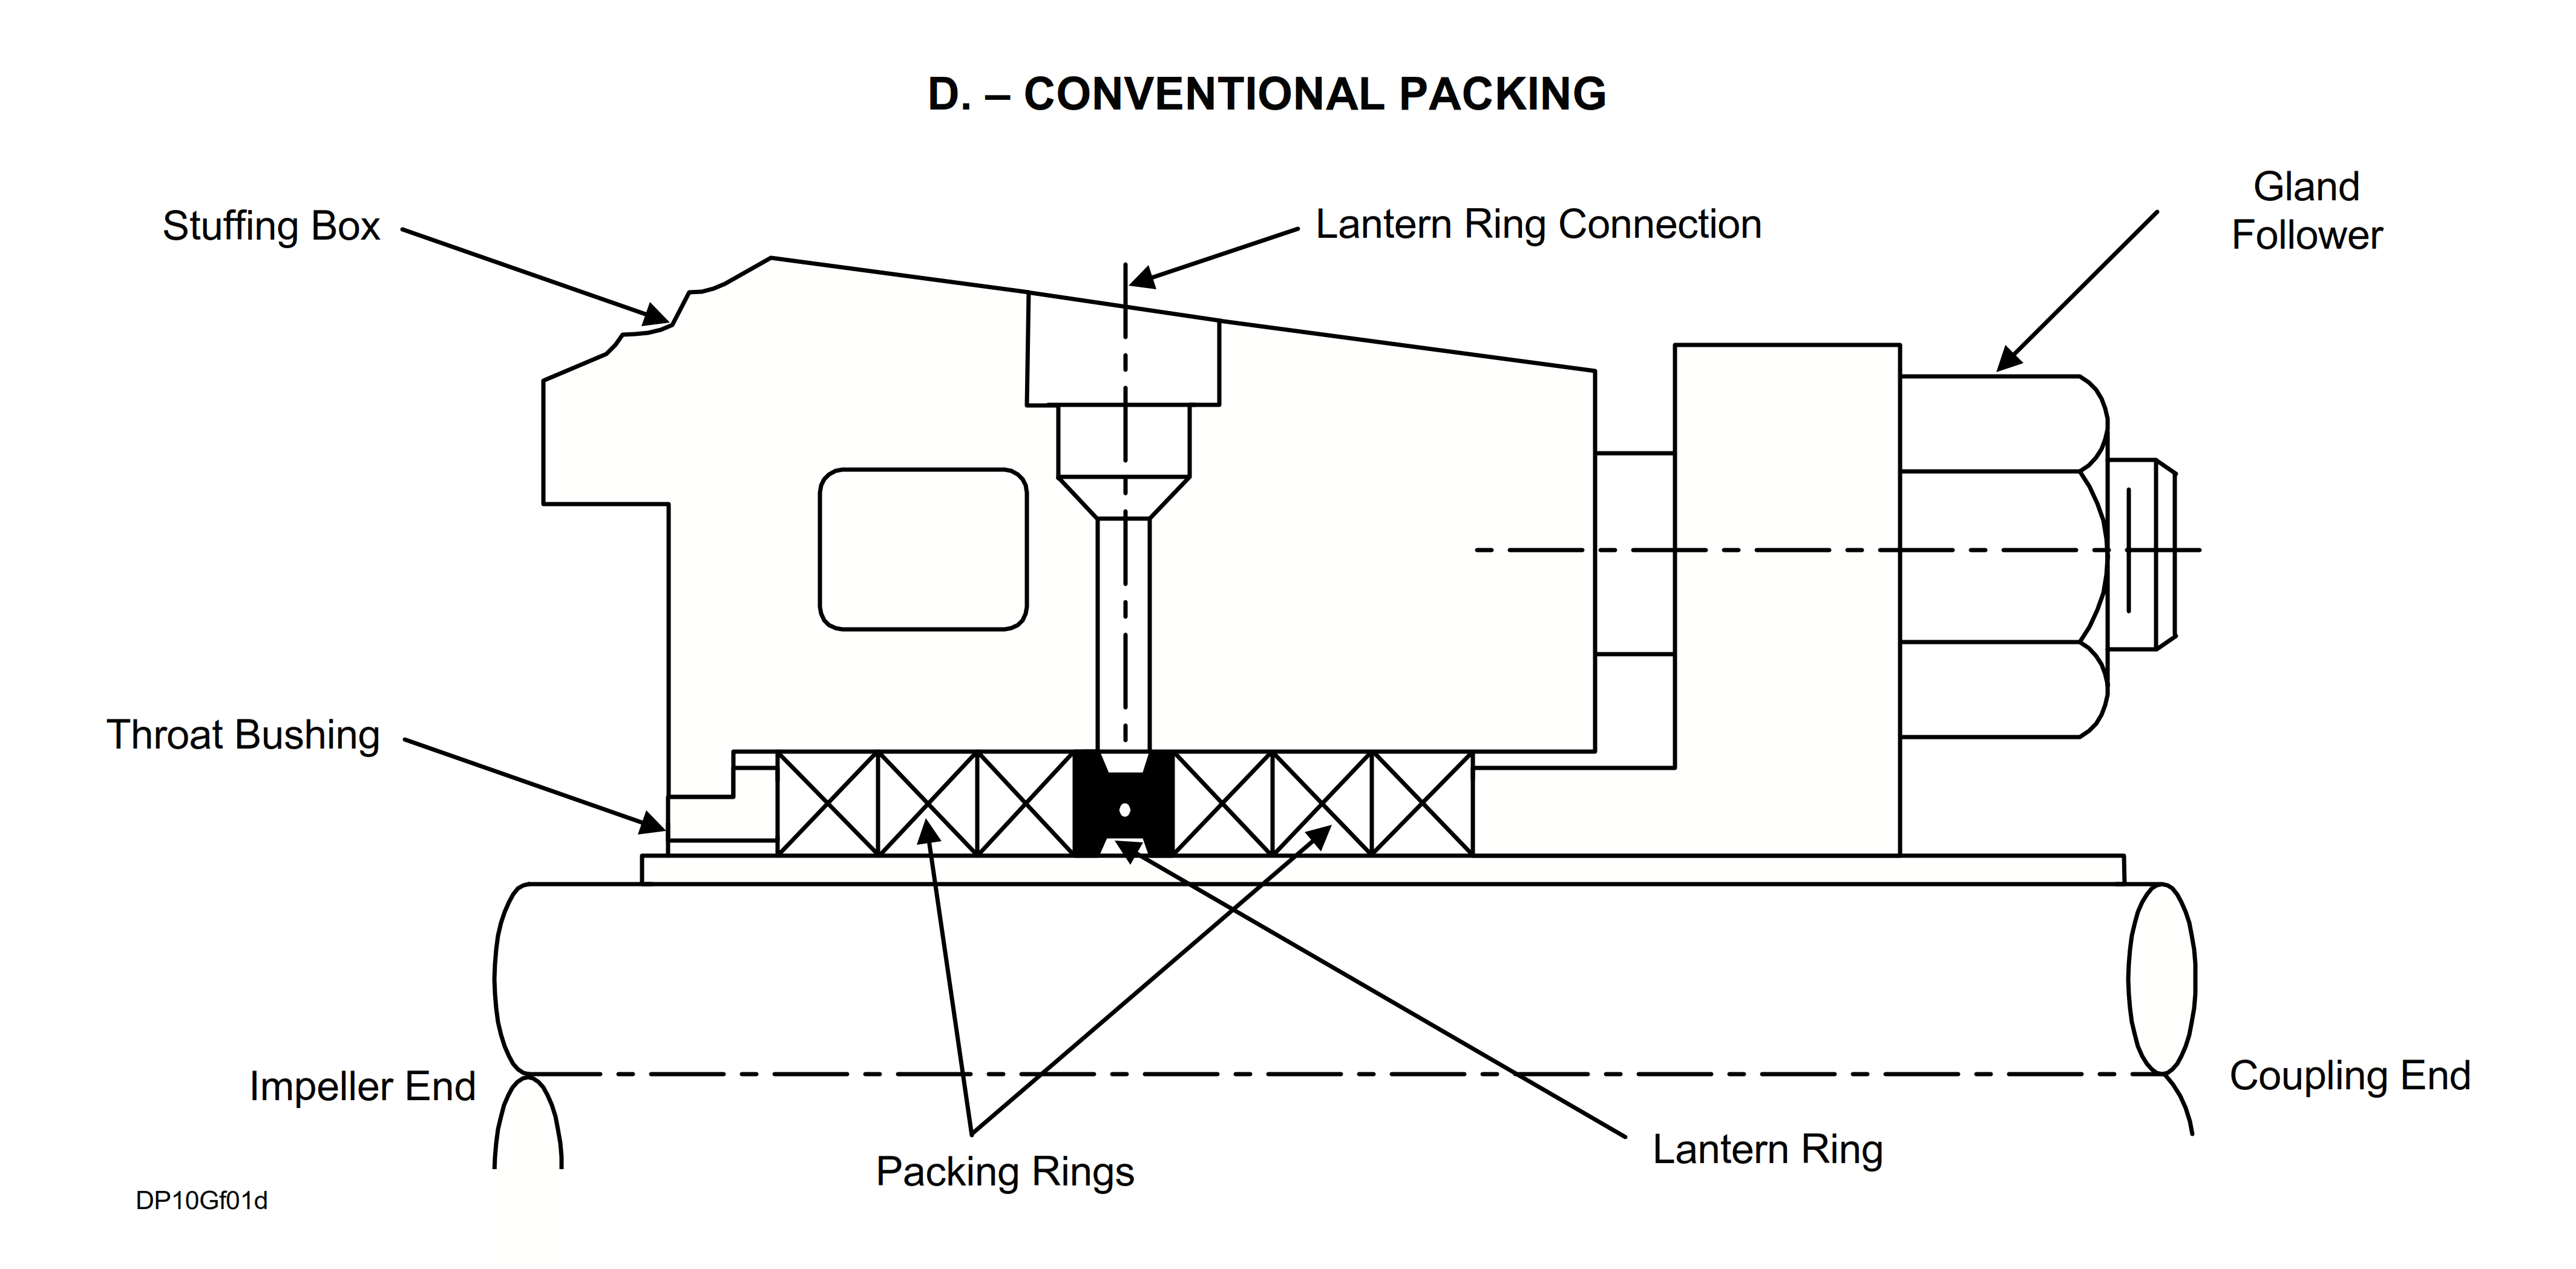 Packed stuffing box